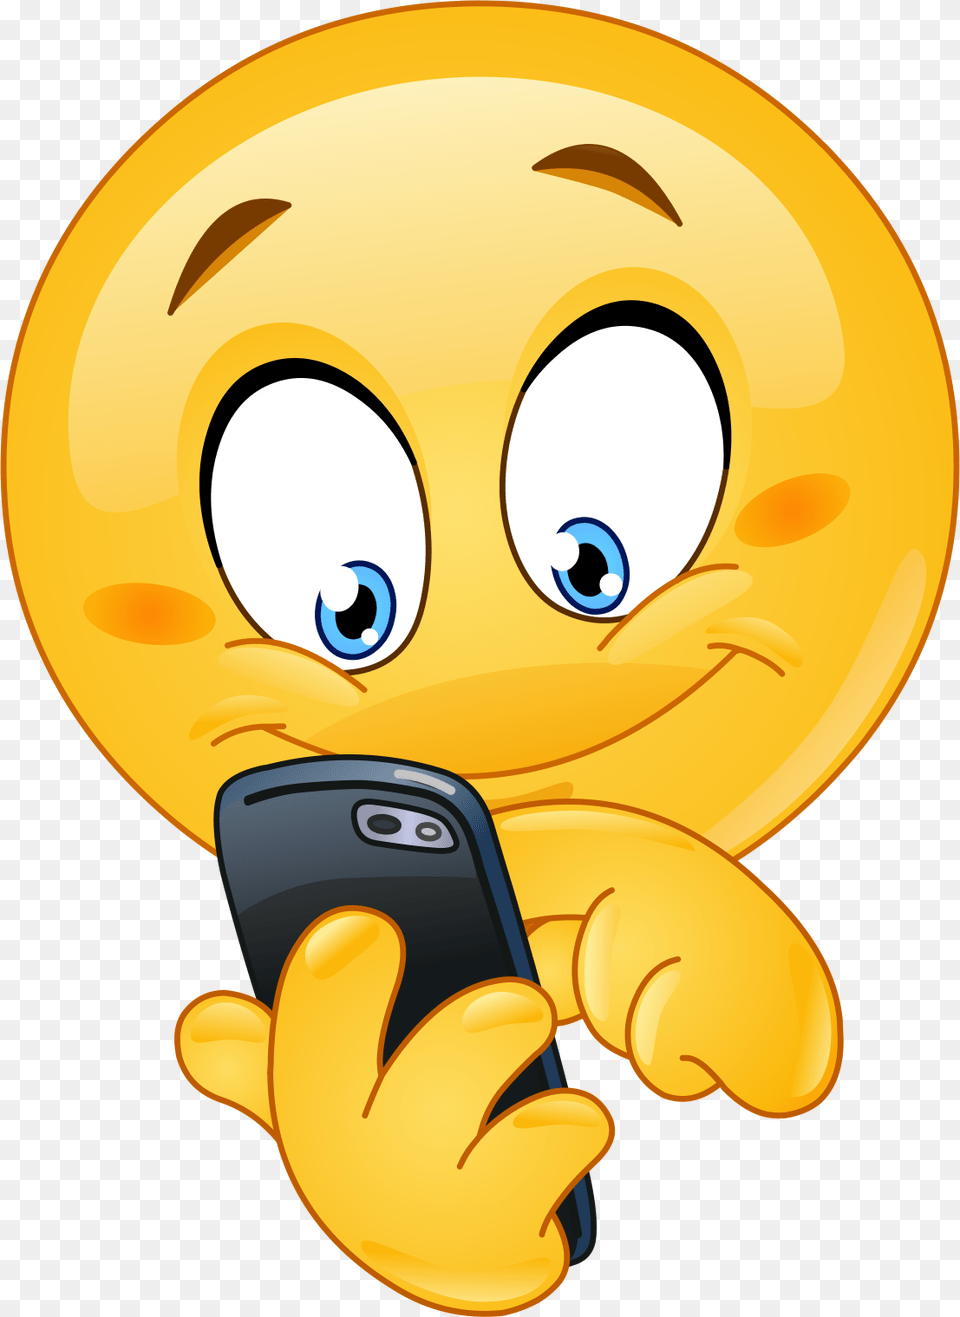 Cell Phone Emoji 209 Decal Emoji On The Phone, Electronics, Mobile Phone Png